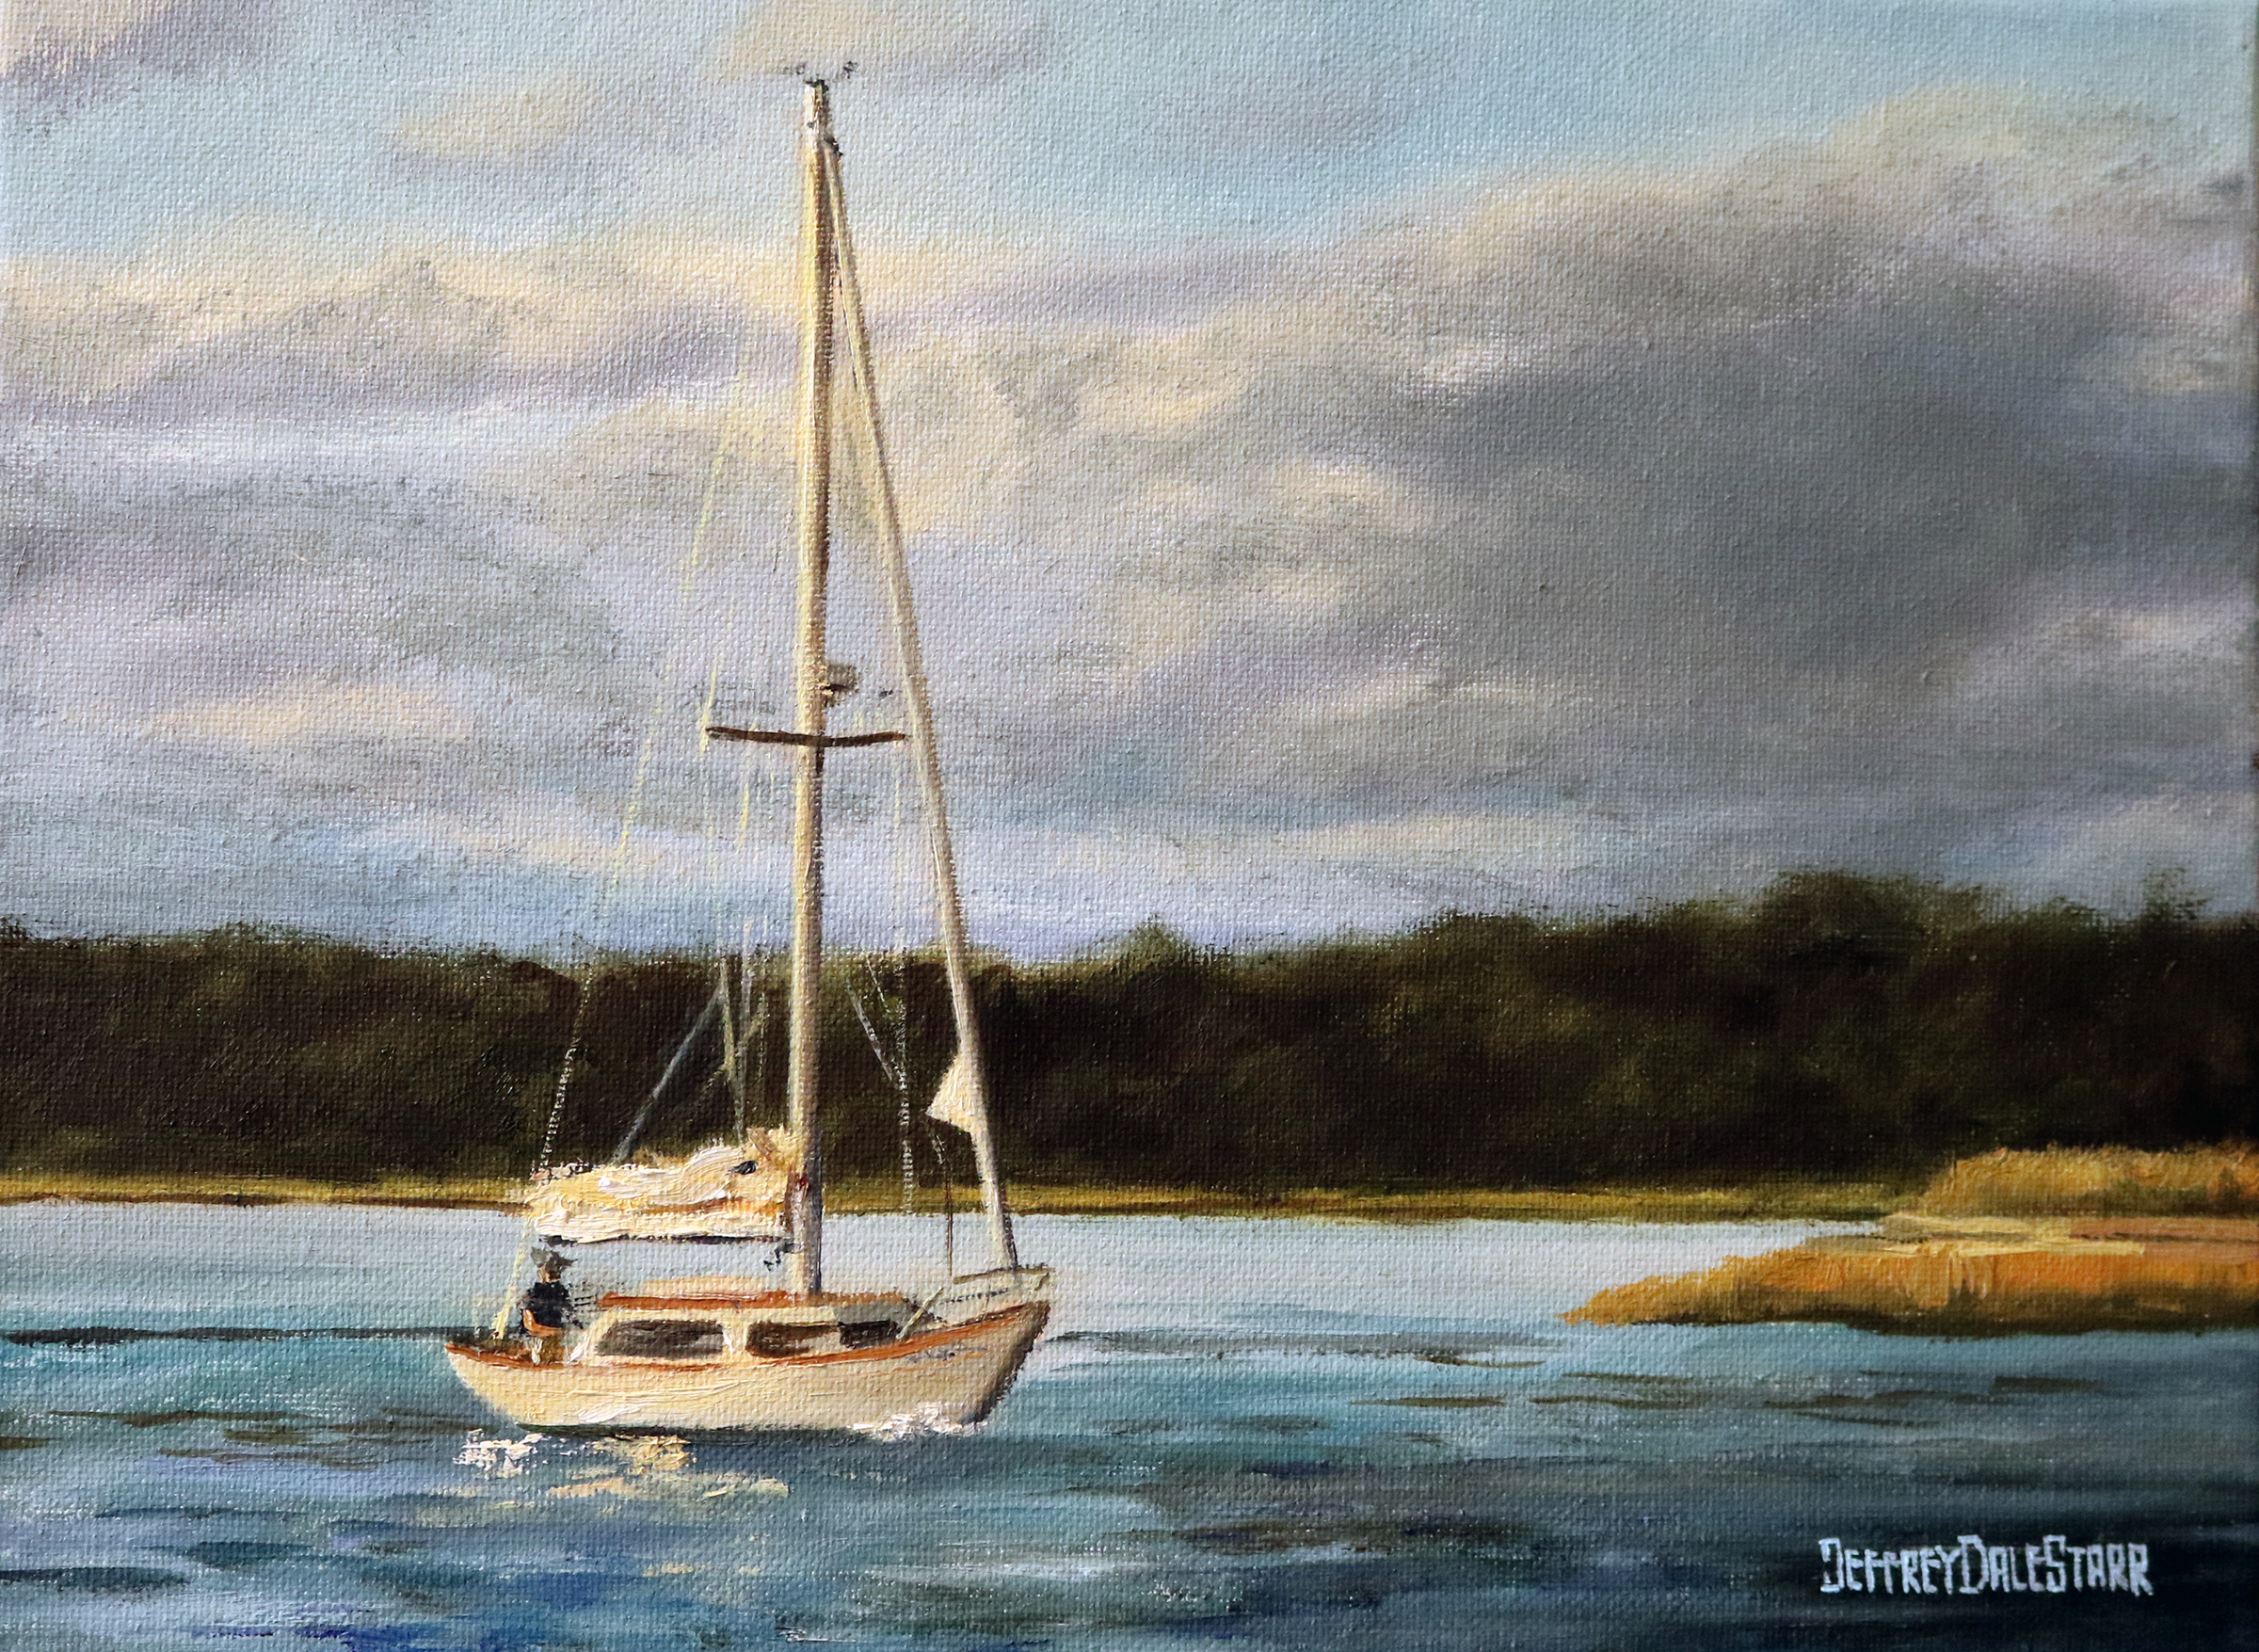 Oil painting "Sailboat Off Nantucket Sound" by Jeffrey Dale Starr